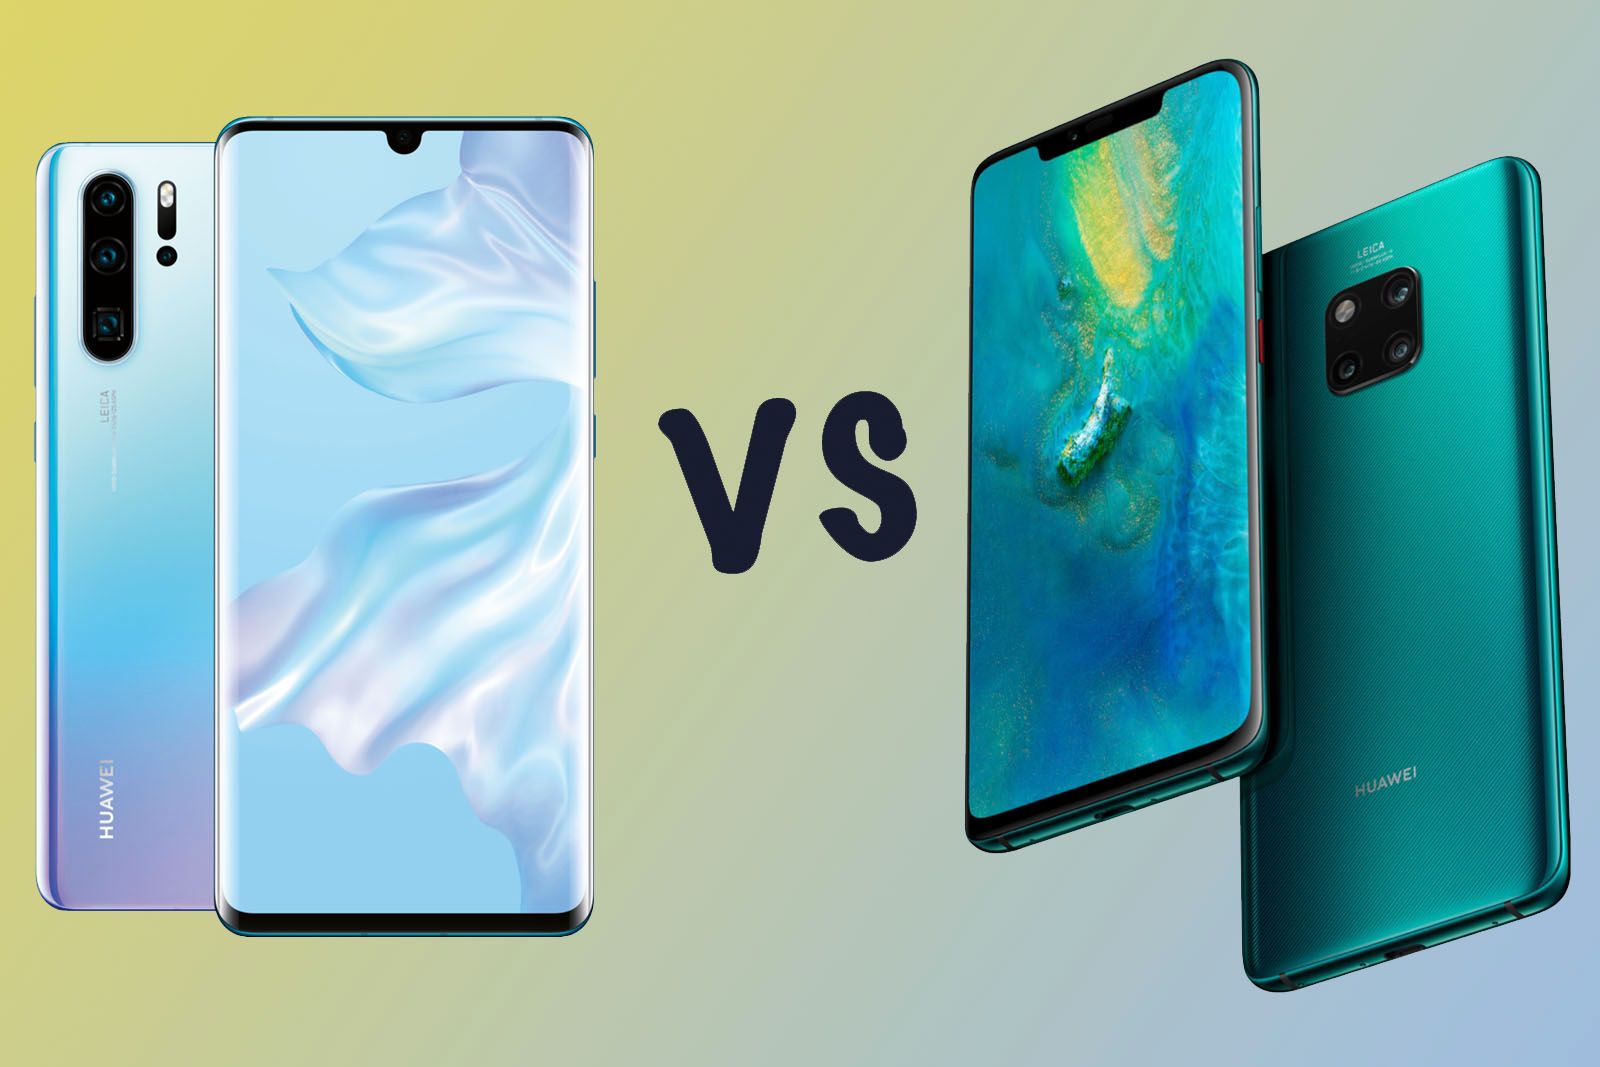 blanding Scene Hvornår Huawei P30 Pro vs Mate 20 Pro: What's the difference?